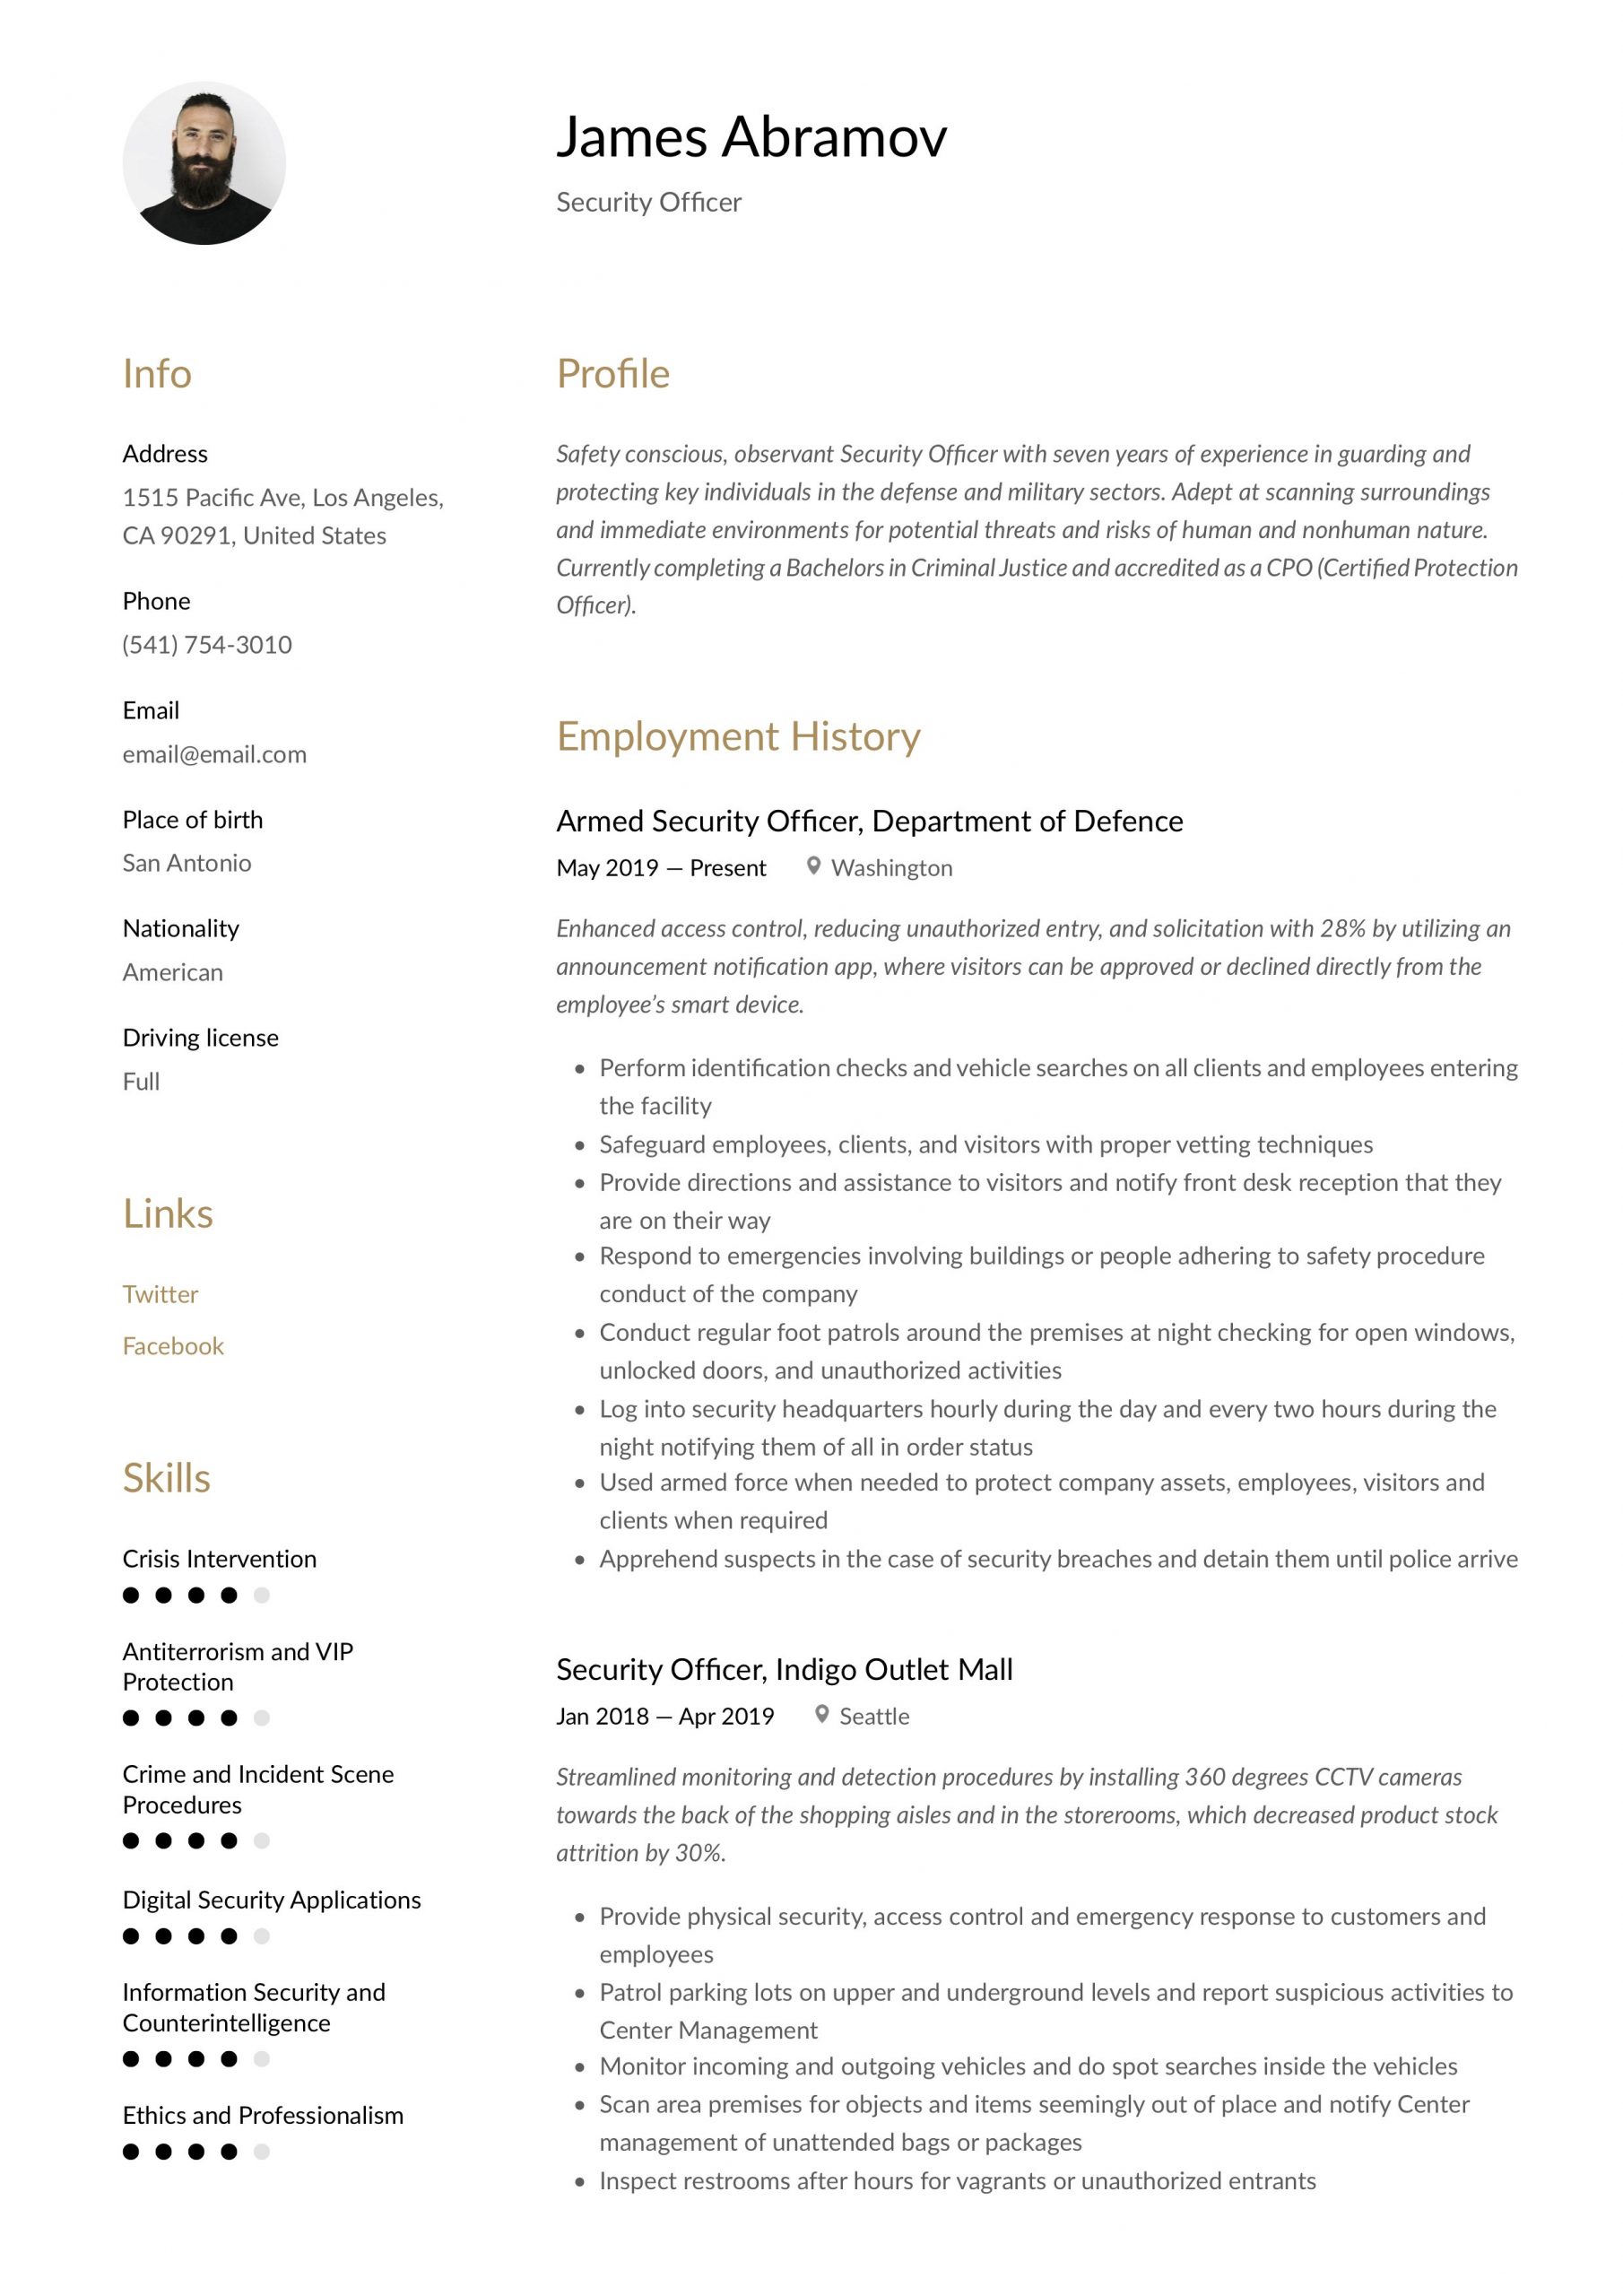 Security Officer Resume Examples and Samples Security Ficer Resume & Writing Guide